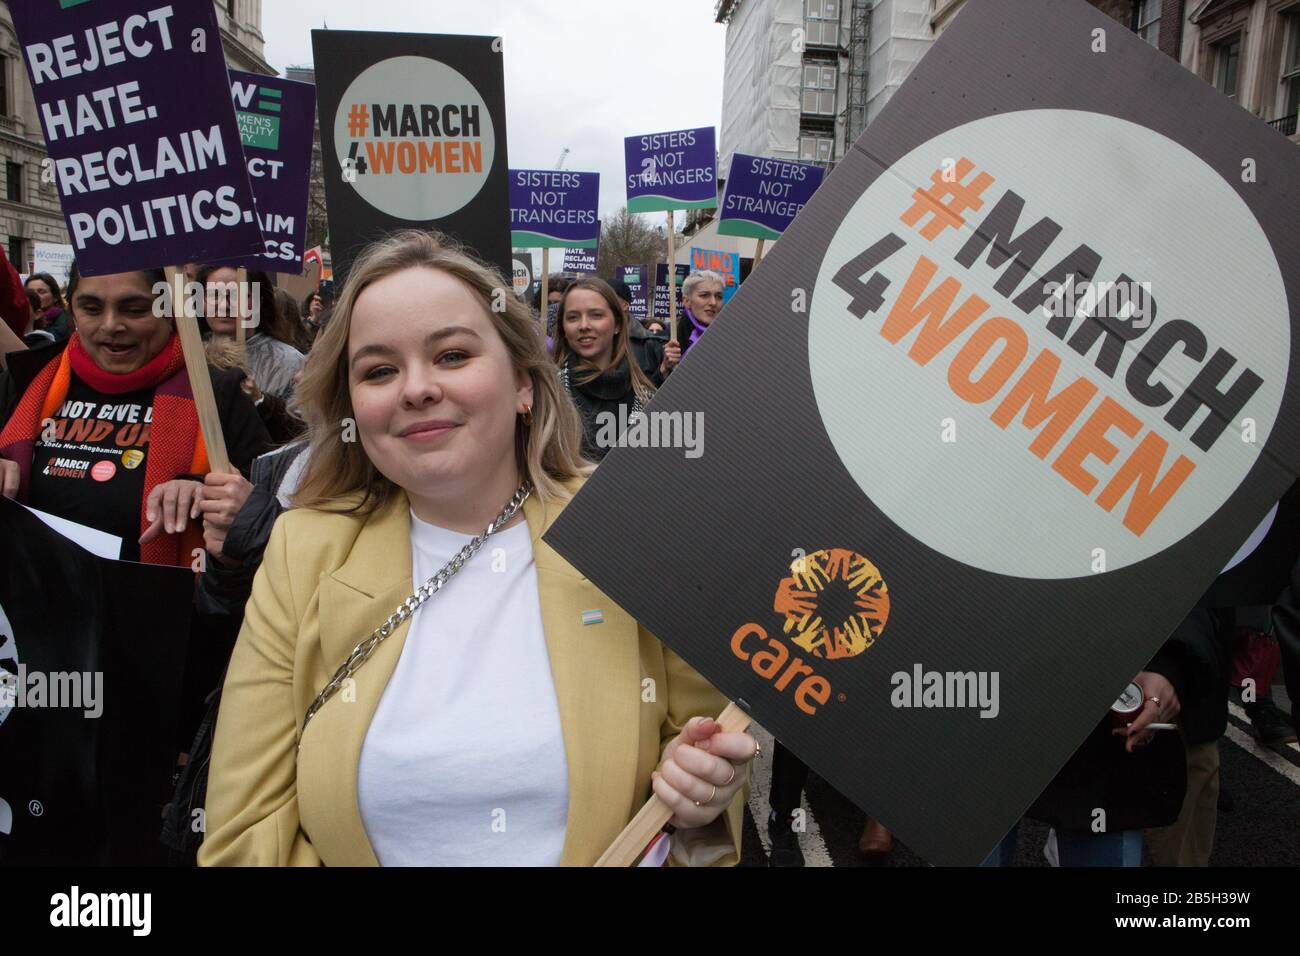 London, UK. 8th Mar 2020. Celebrities, campaigners and politicians joined the March4Women, organised by Care and the Women's Equality Party, to mark International Women's Day. Here in a yellow jacket, Derry Girls actress Nicola Coughlan carried a placard and joined in the chanting. Credit: Anna Watson/Alamy Live News Stock Photo